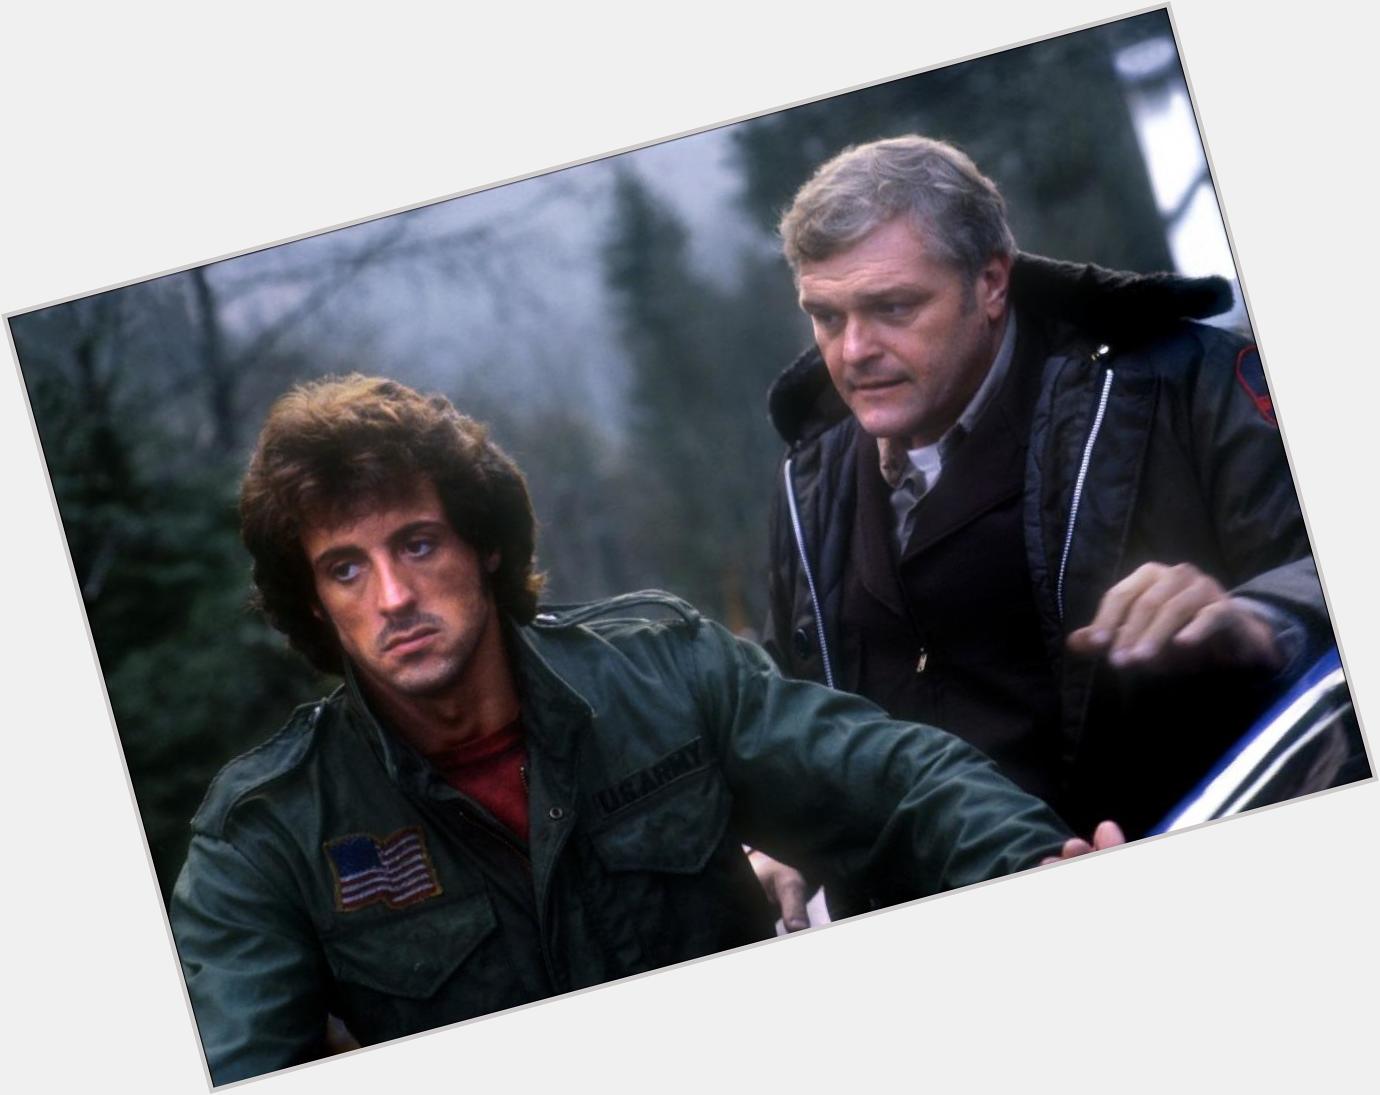 Happy birthday to Tony-award winning actor Brian Dennehy CC\60 who played opposite Slyvester Stallone in Rambo 